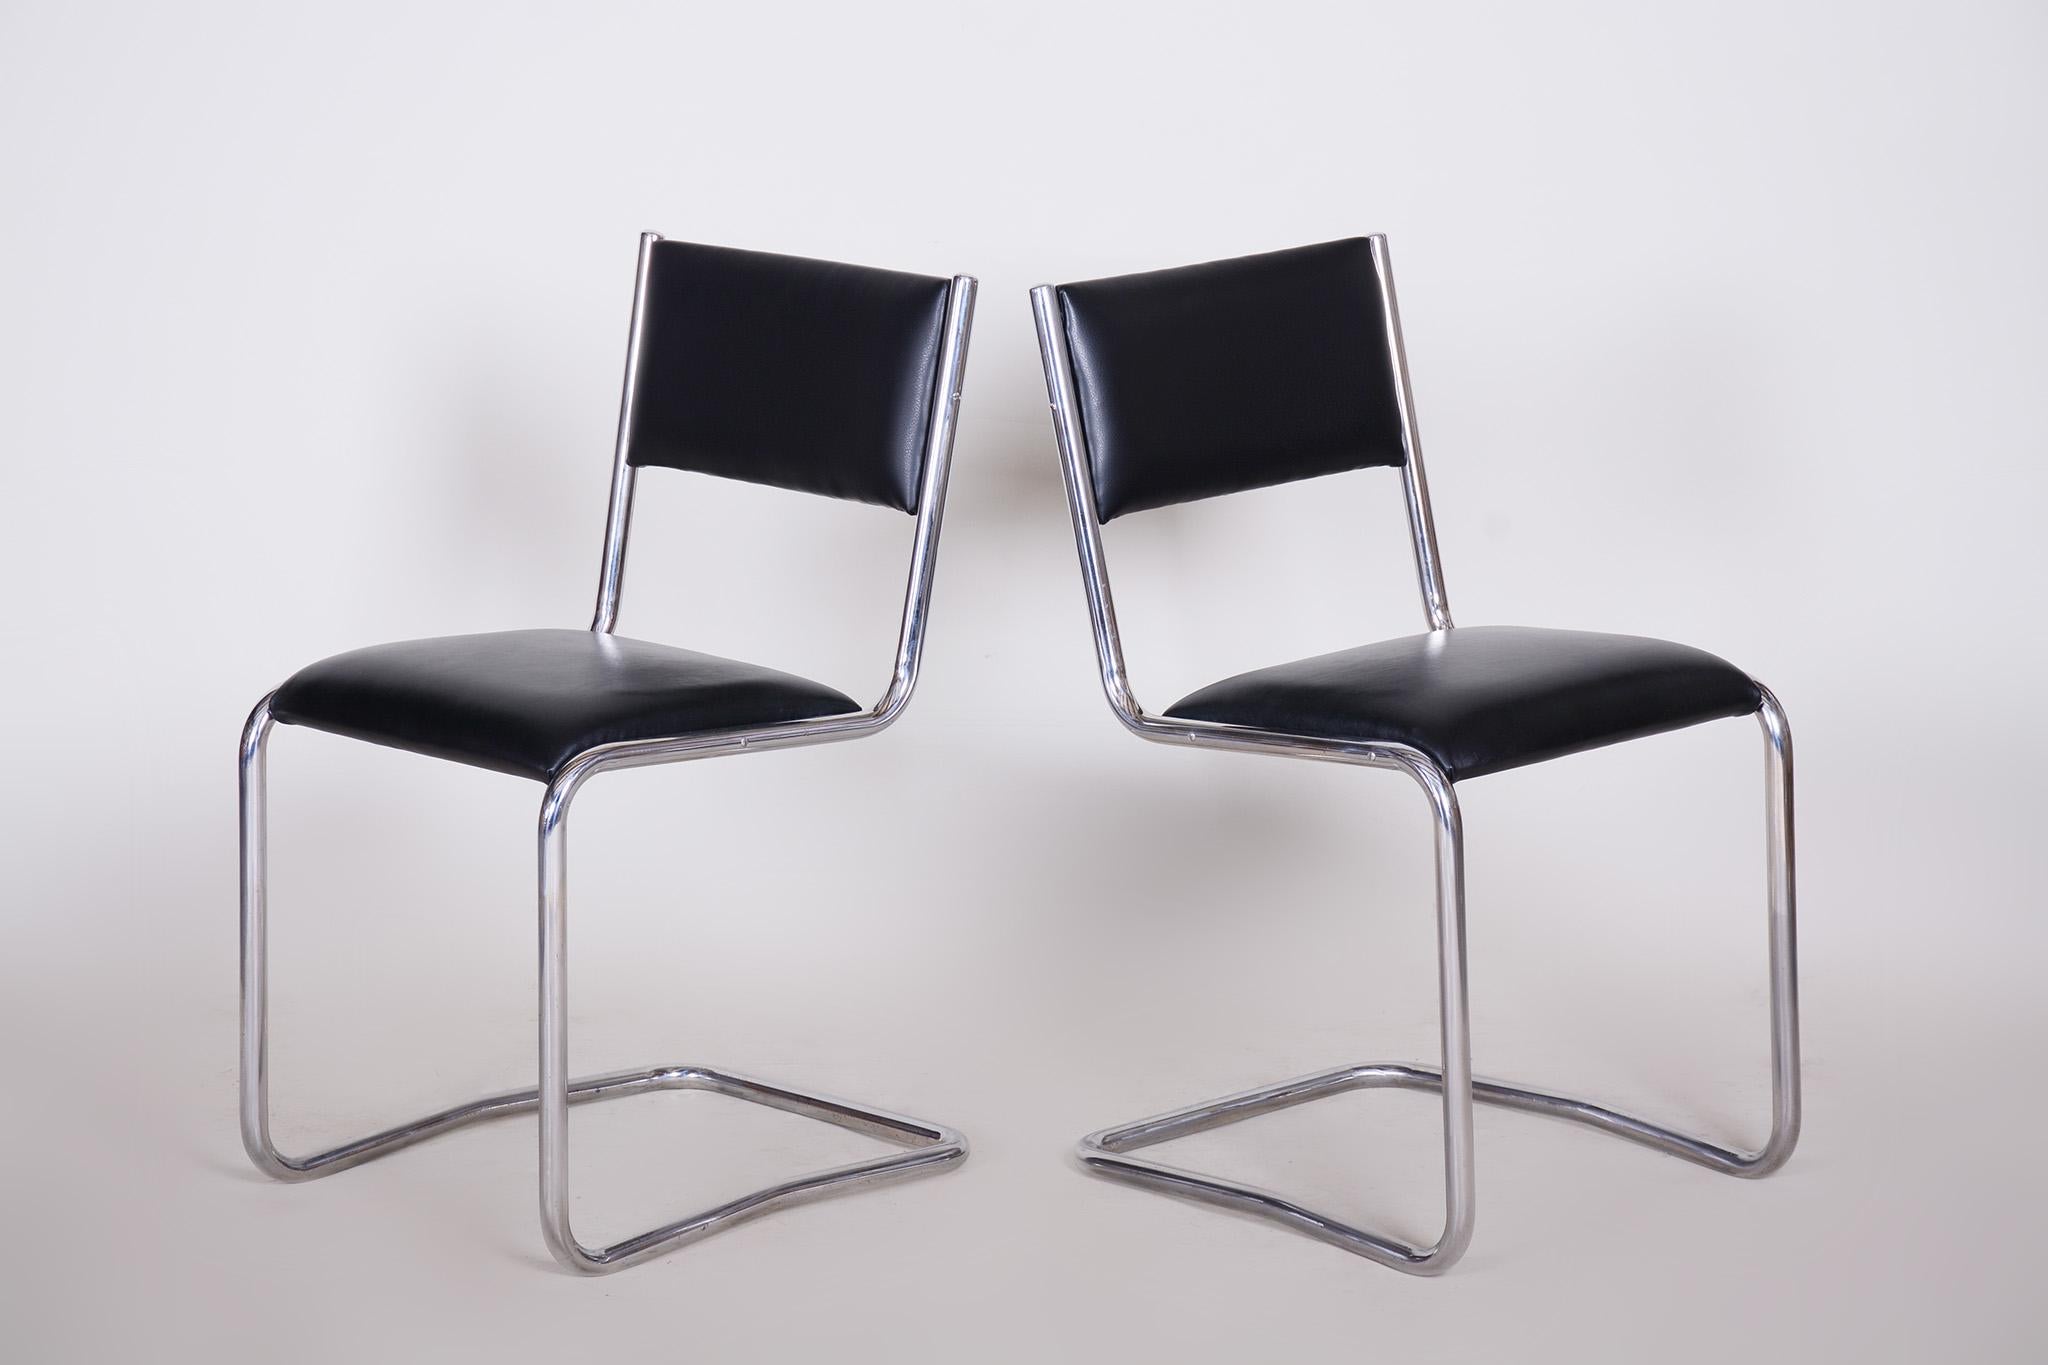 Black Leather Bauhaus Chairs, 1930s Czechia For Sale 4